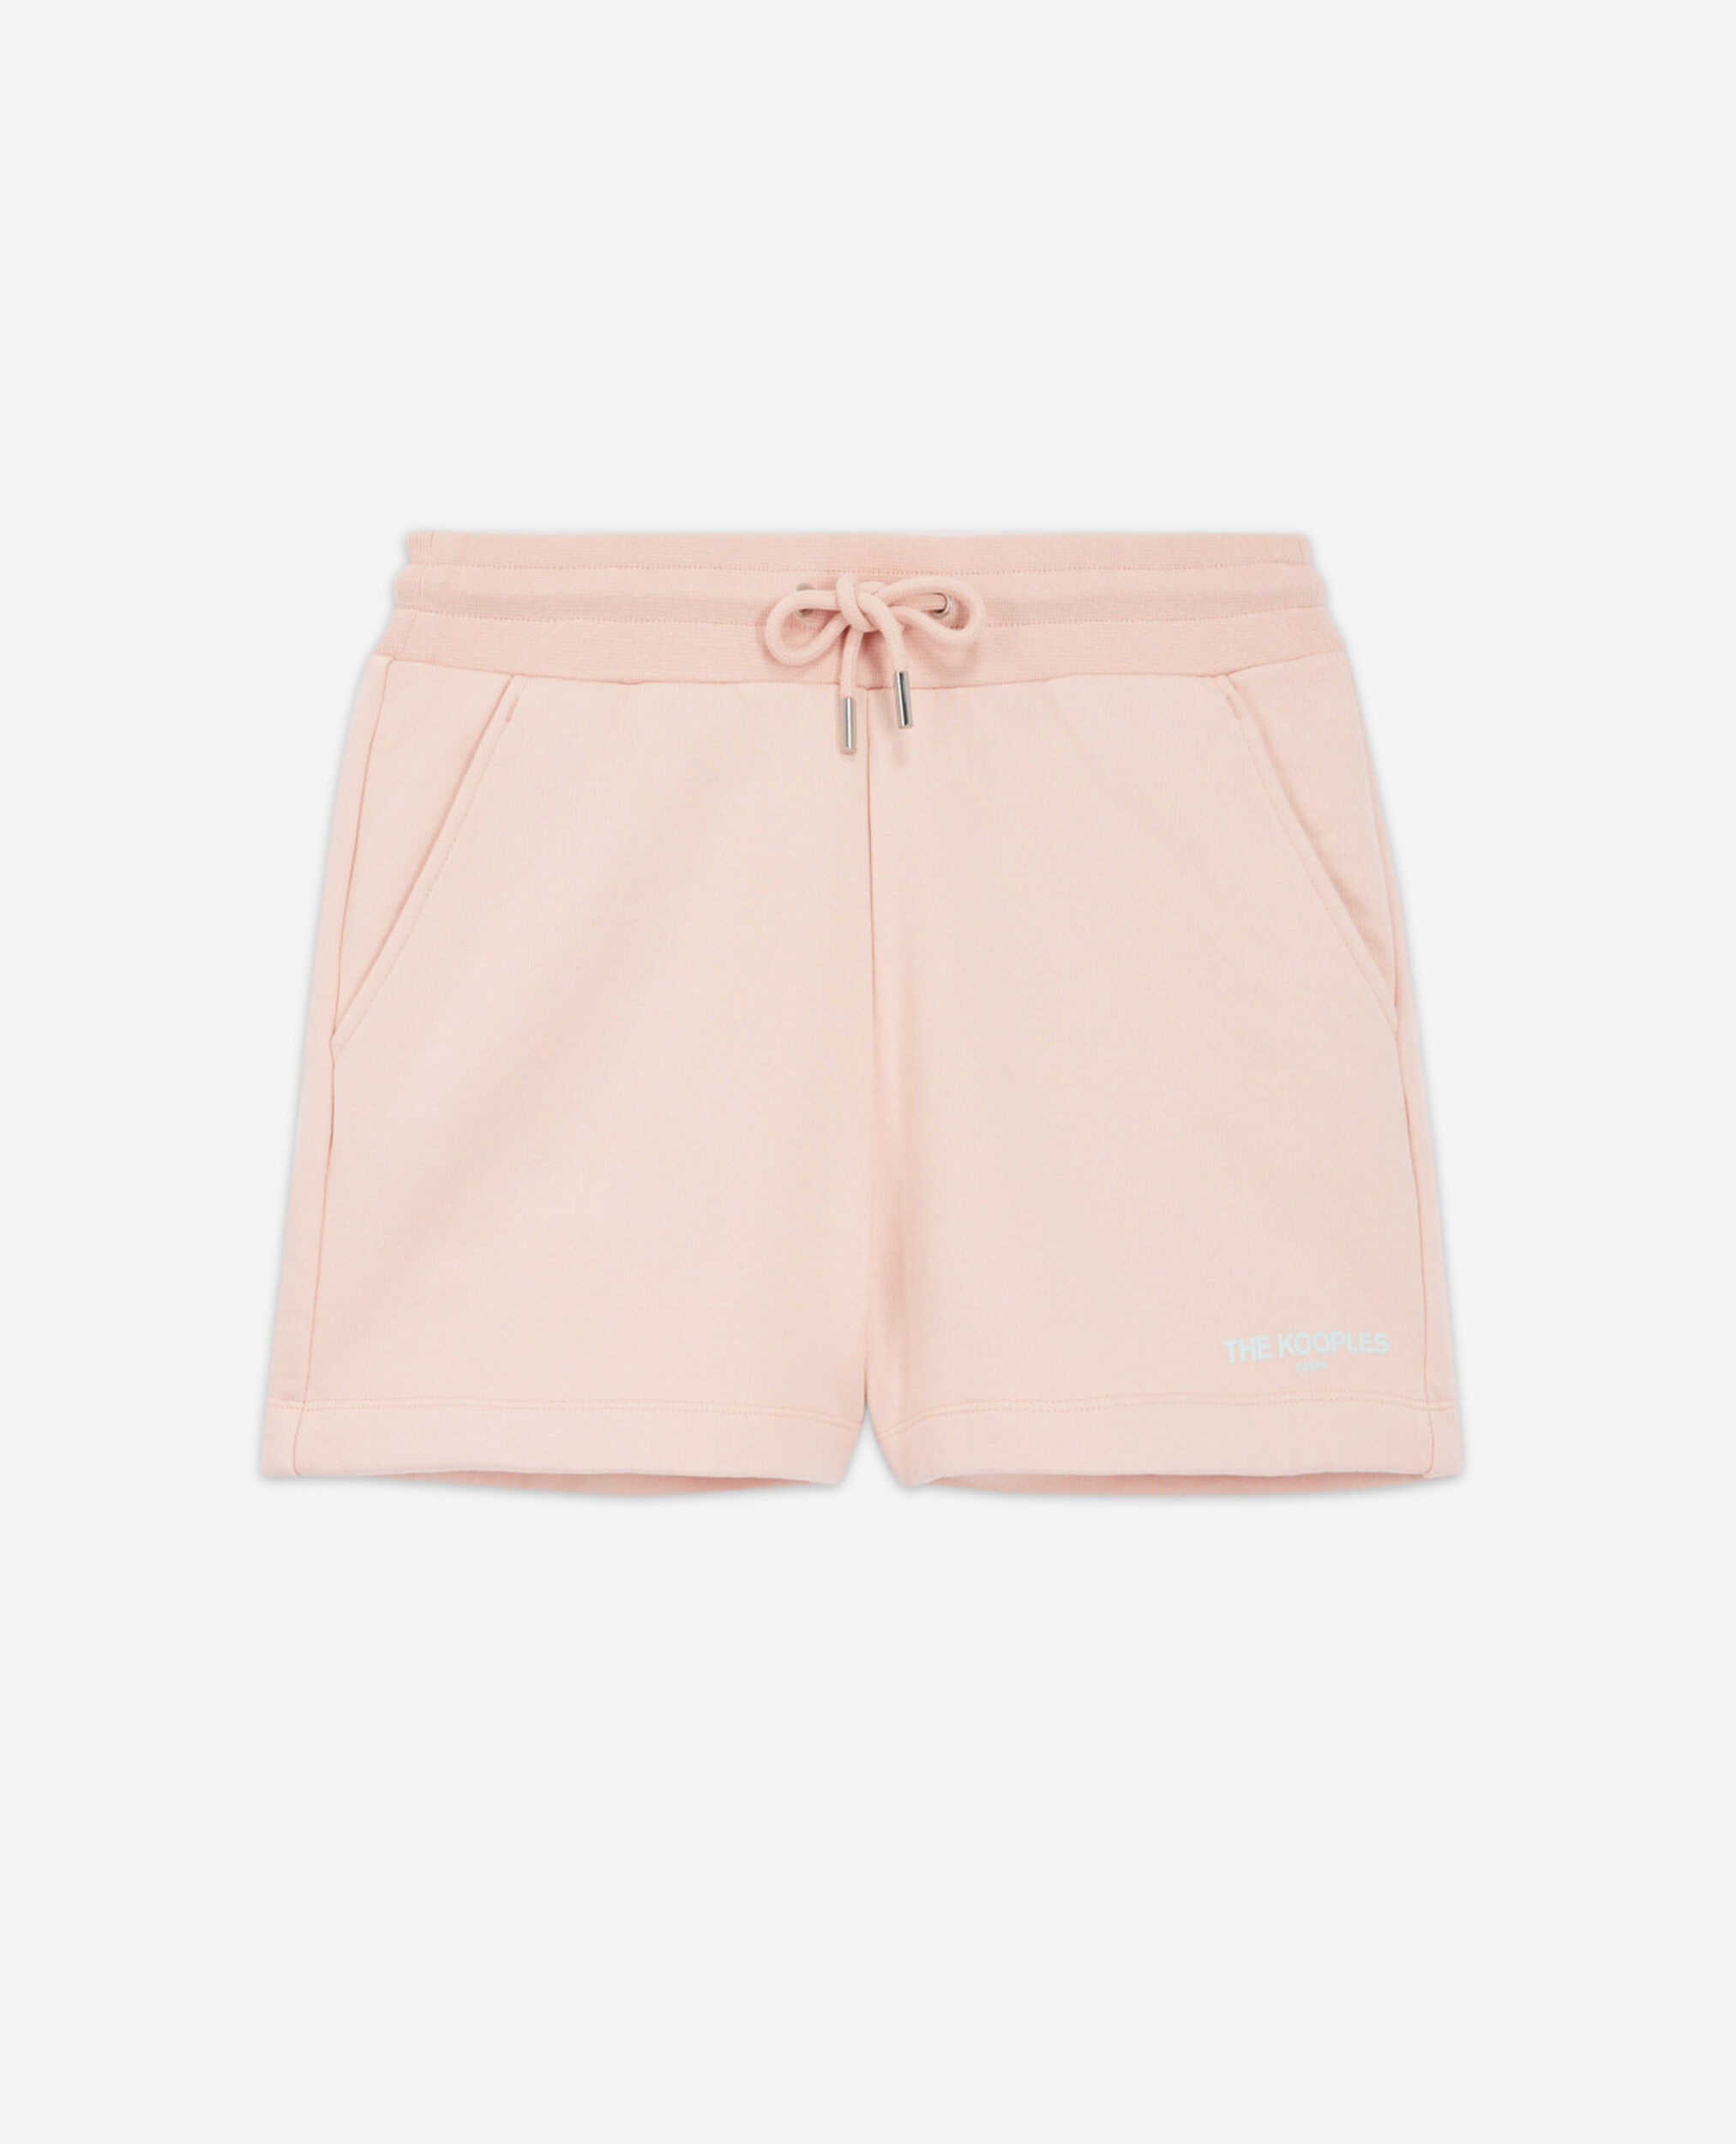 Pink fleece shorts with elastic waist and logo, PINK, hi-res image number null